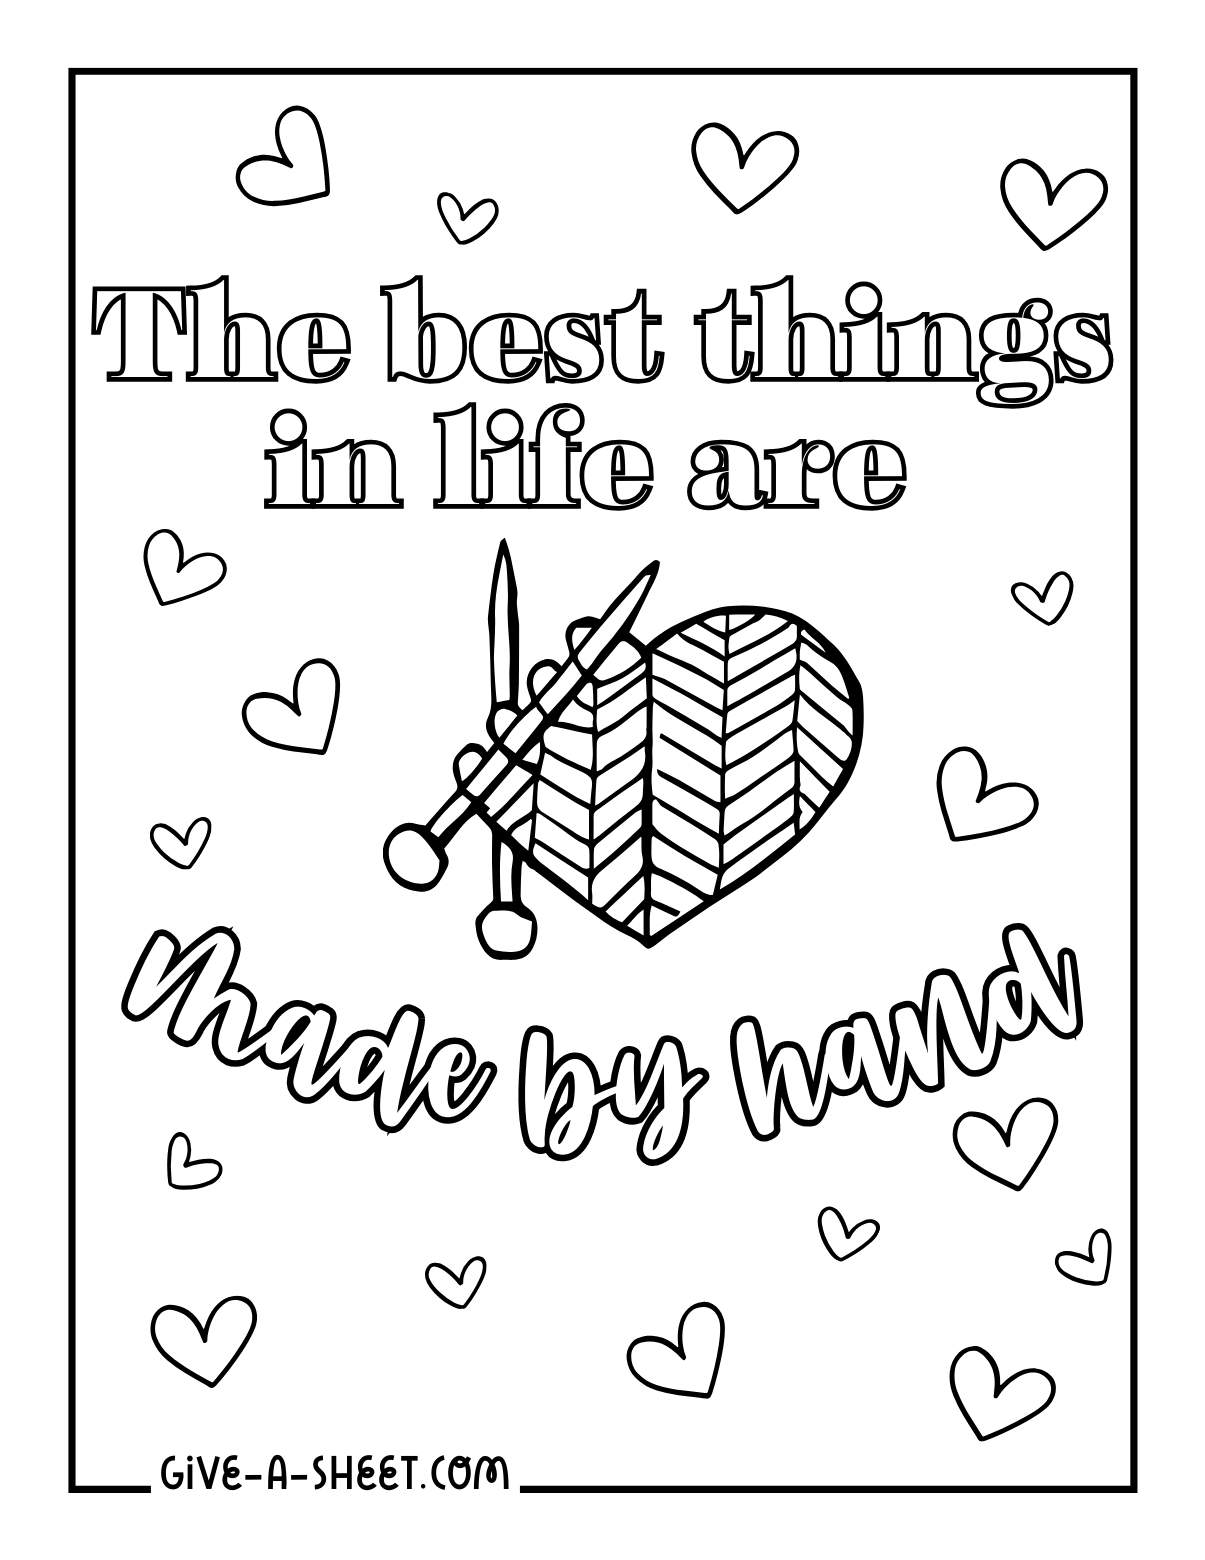 Handmade design knitting coloring page.